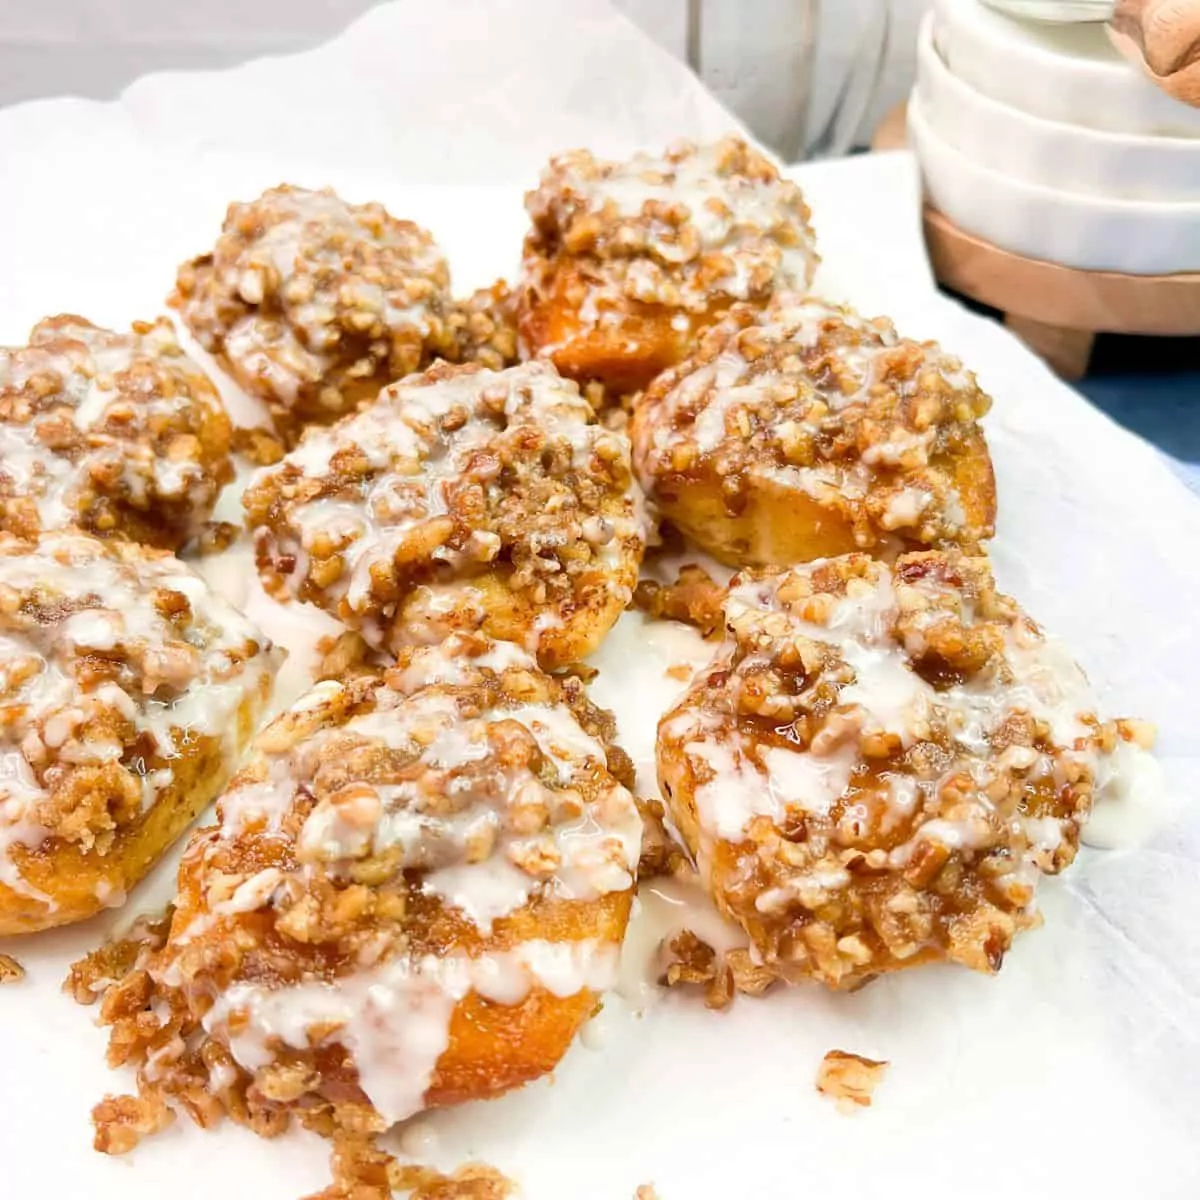 upgraded recipe for refrigerator cinnamon rolls and a homemade brown sugar pecan topping.